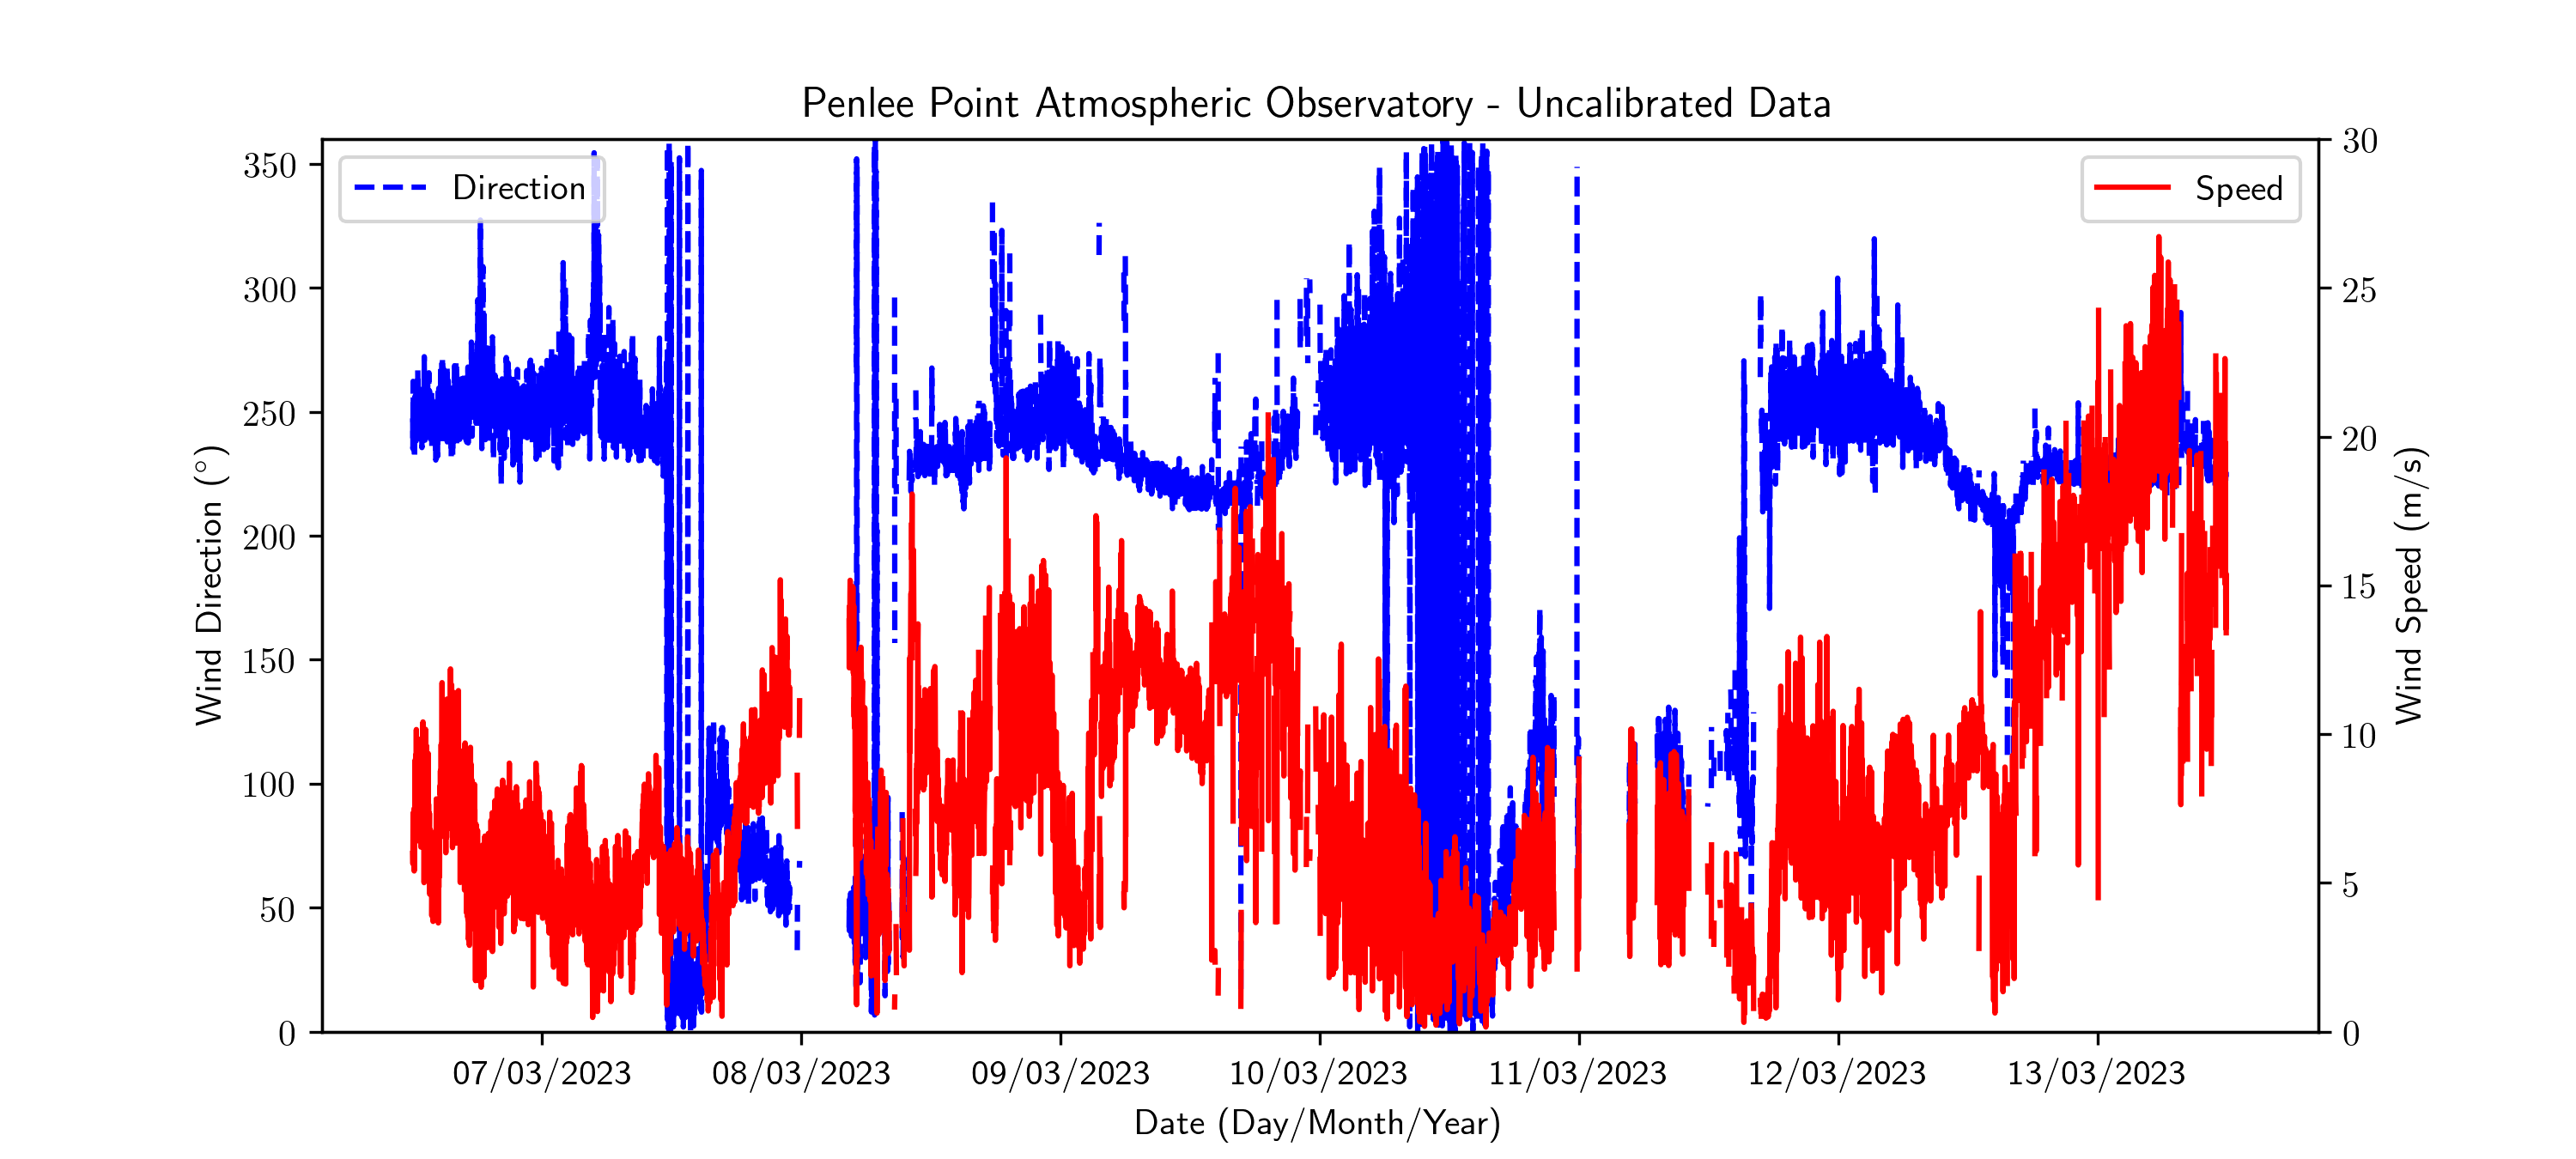 Wind Speed and Direction time series plot